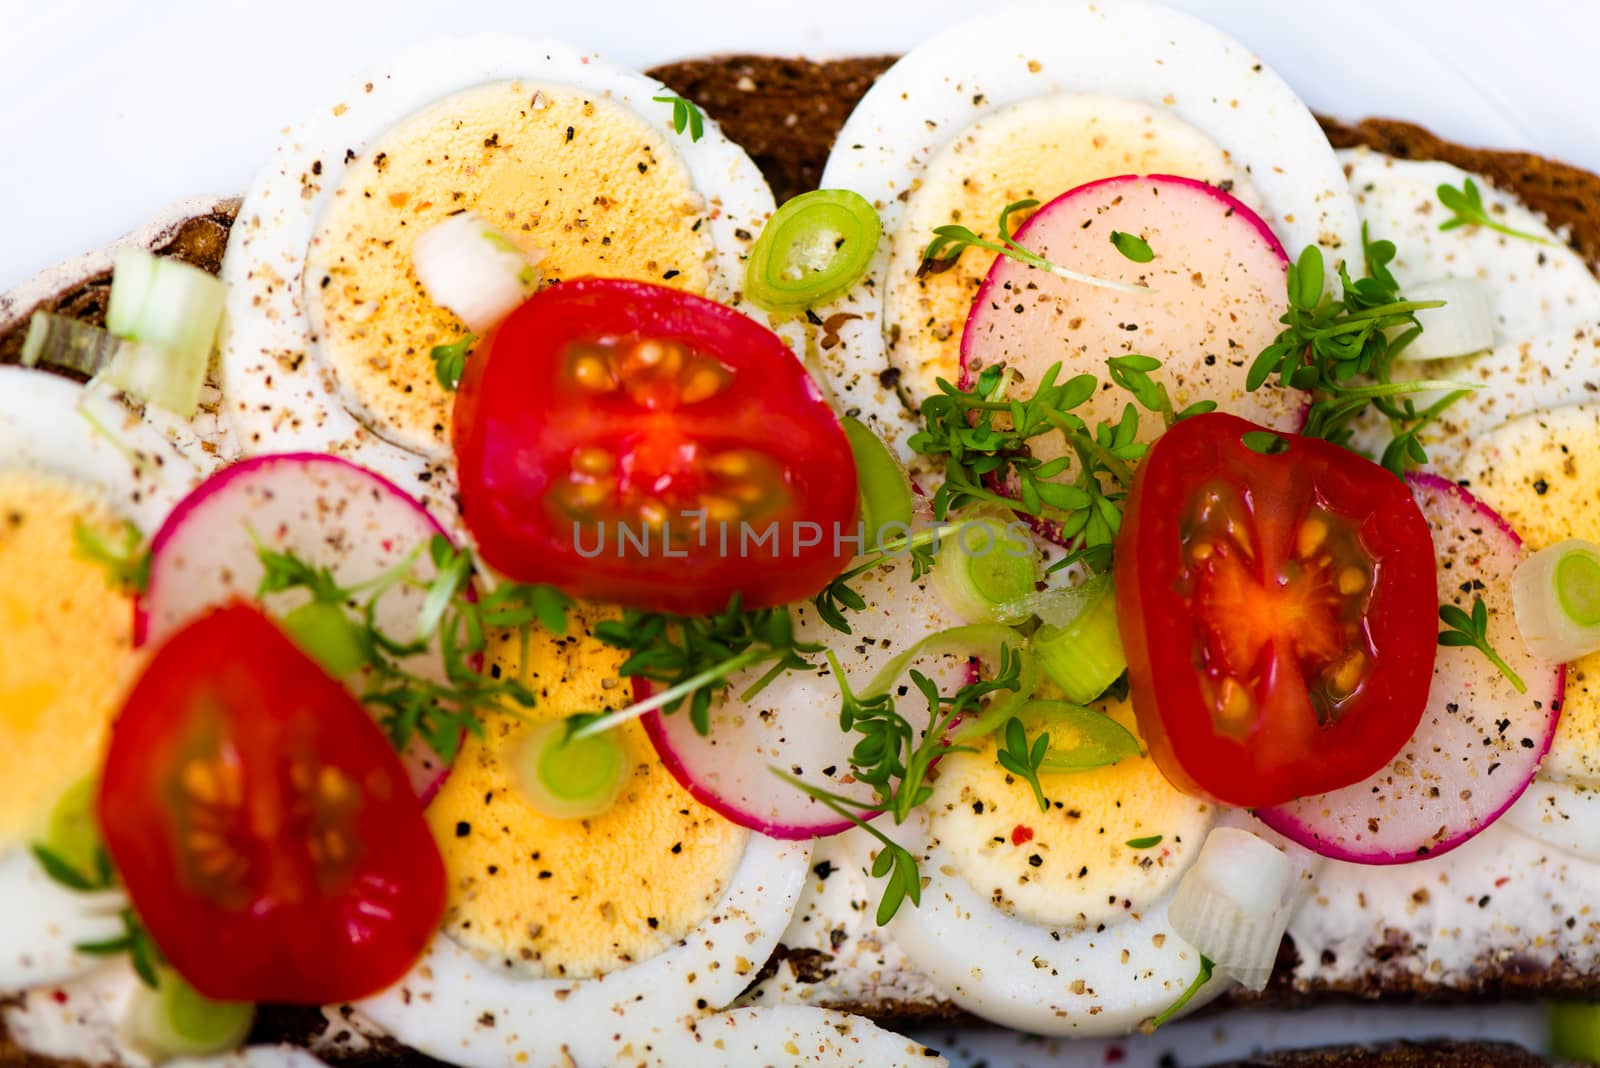 Healthy snack - wholemeal bread with egg tomatos and fresh cress and radishes